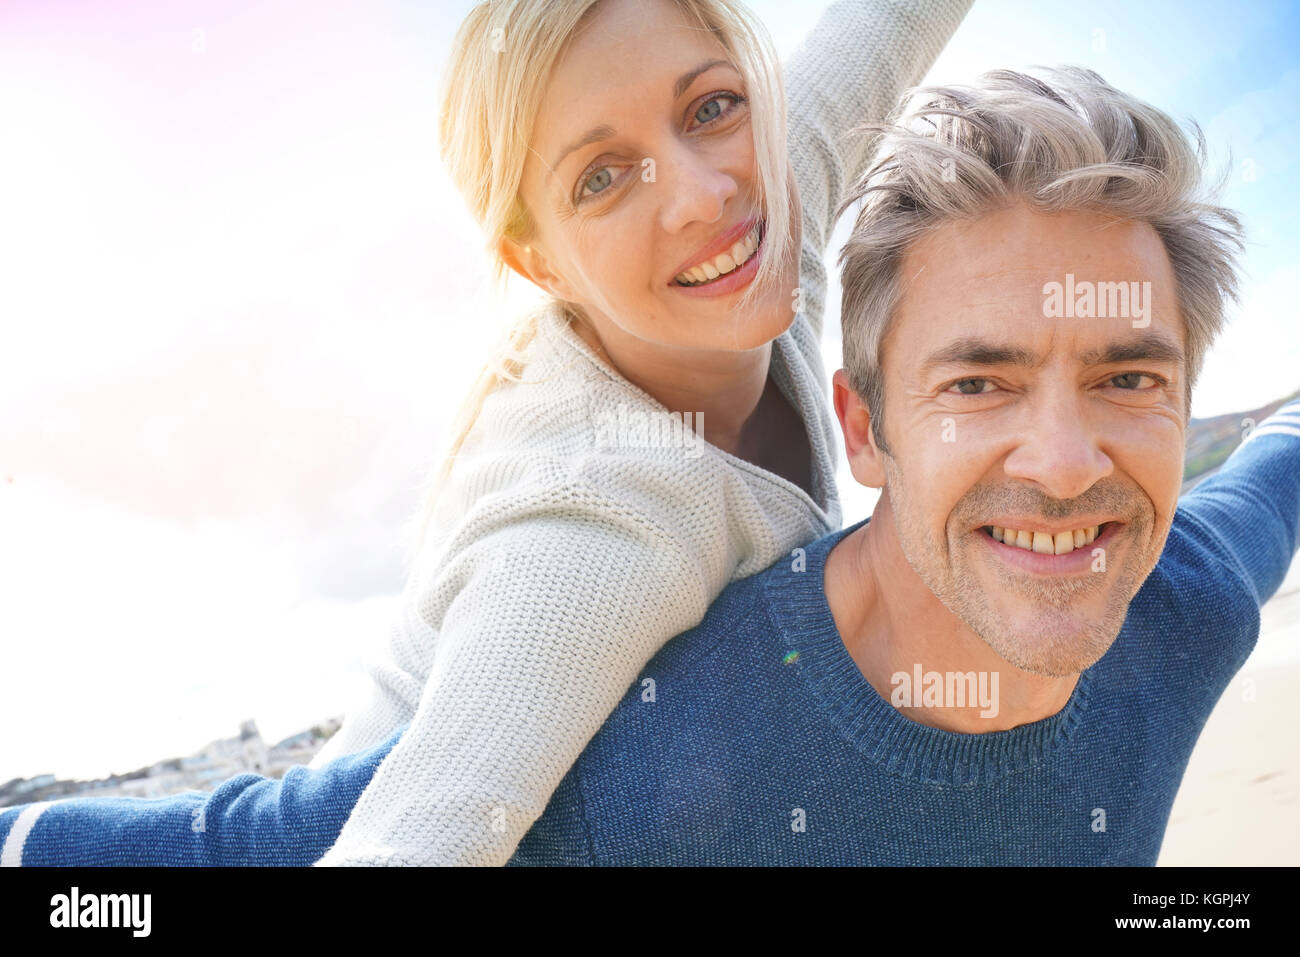 Man giving piggyback ride to woman at the beach Banque D'Images